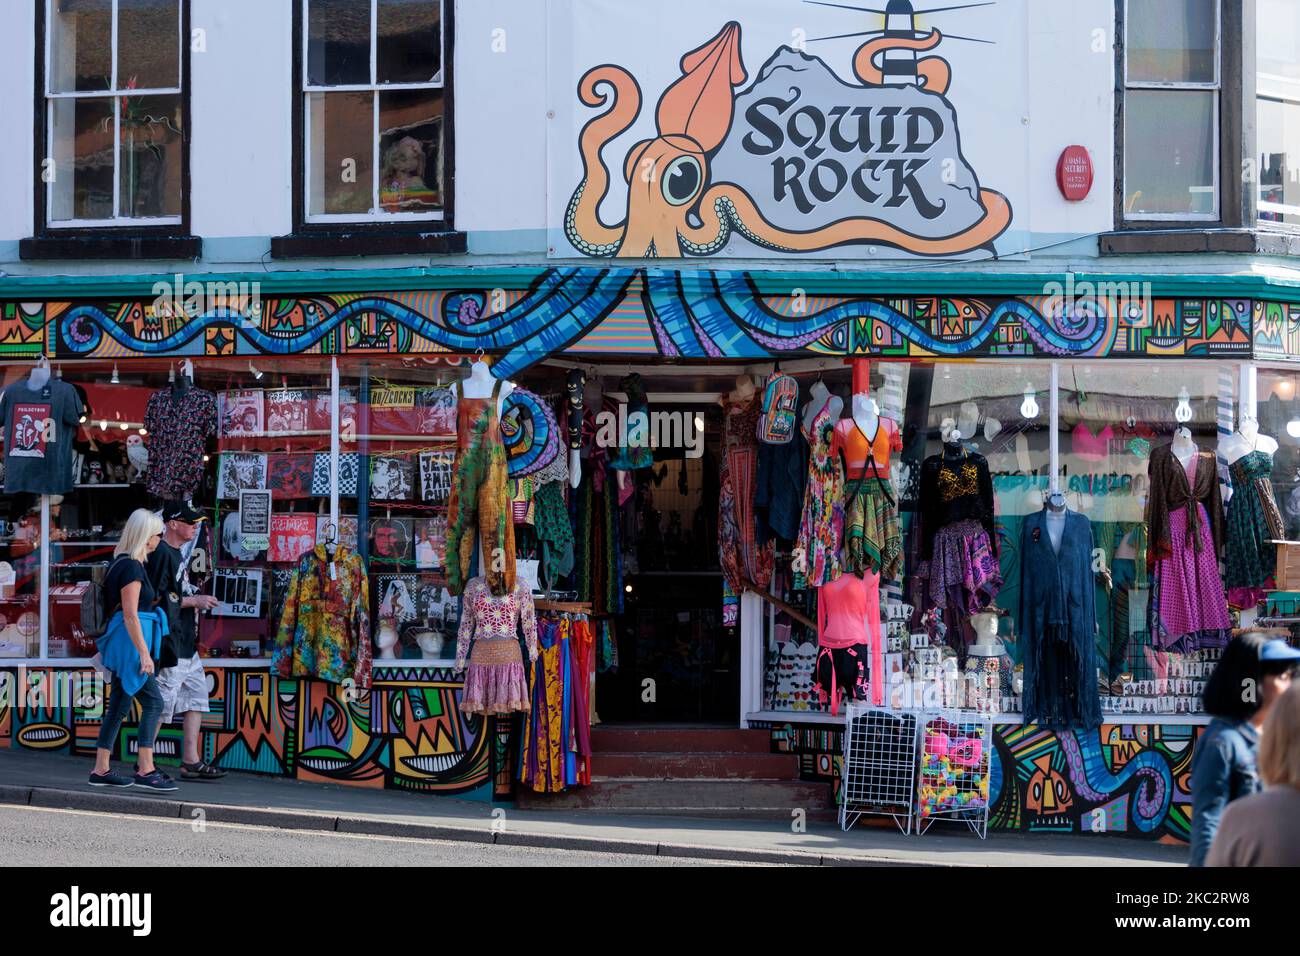 Squid Rock Shop Whitby North Yorkshire England Stockfoto